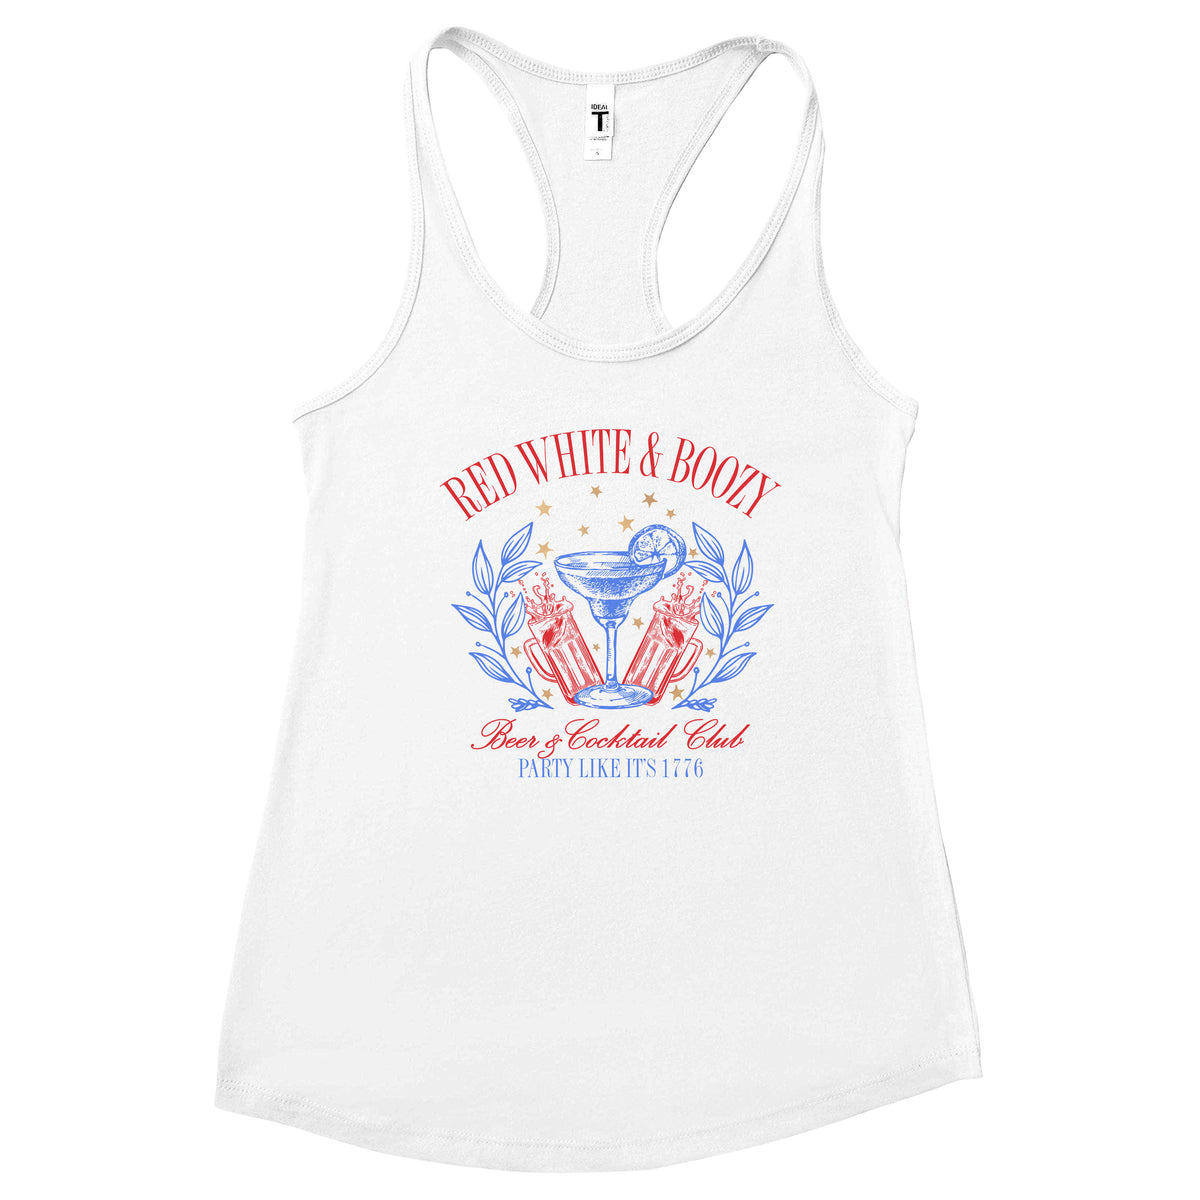 Red White & Boozy, Beer & Cocktail Club Tank Top